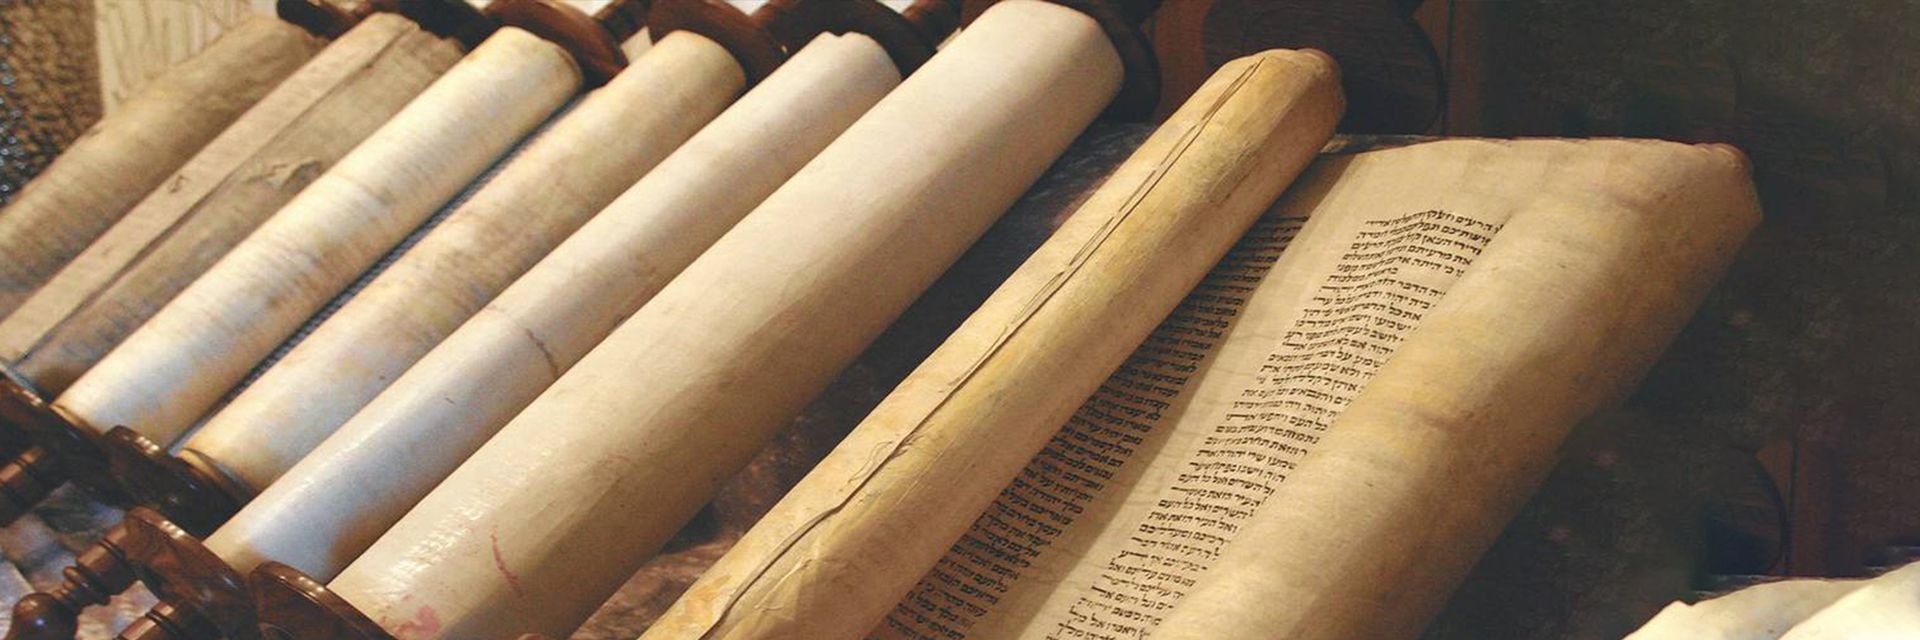 The Long Strange Story of Search&#58; From Ancient Scrolls to Digital Books